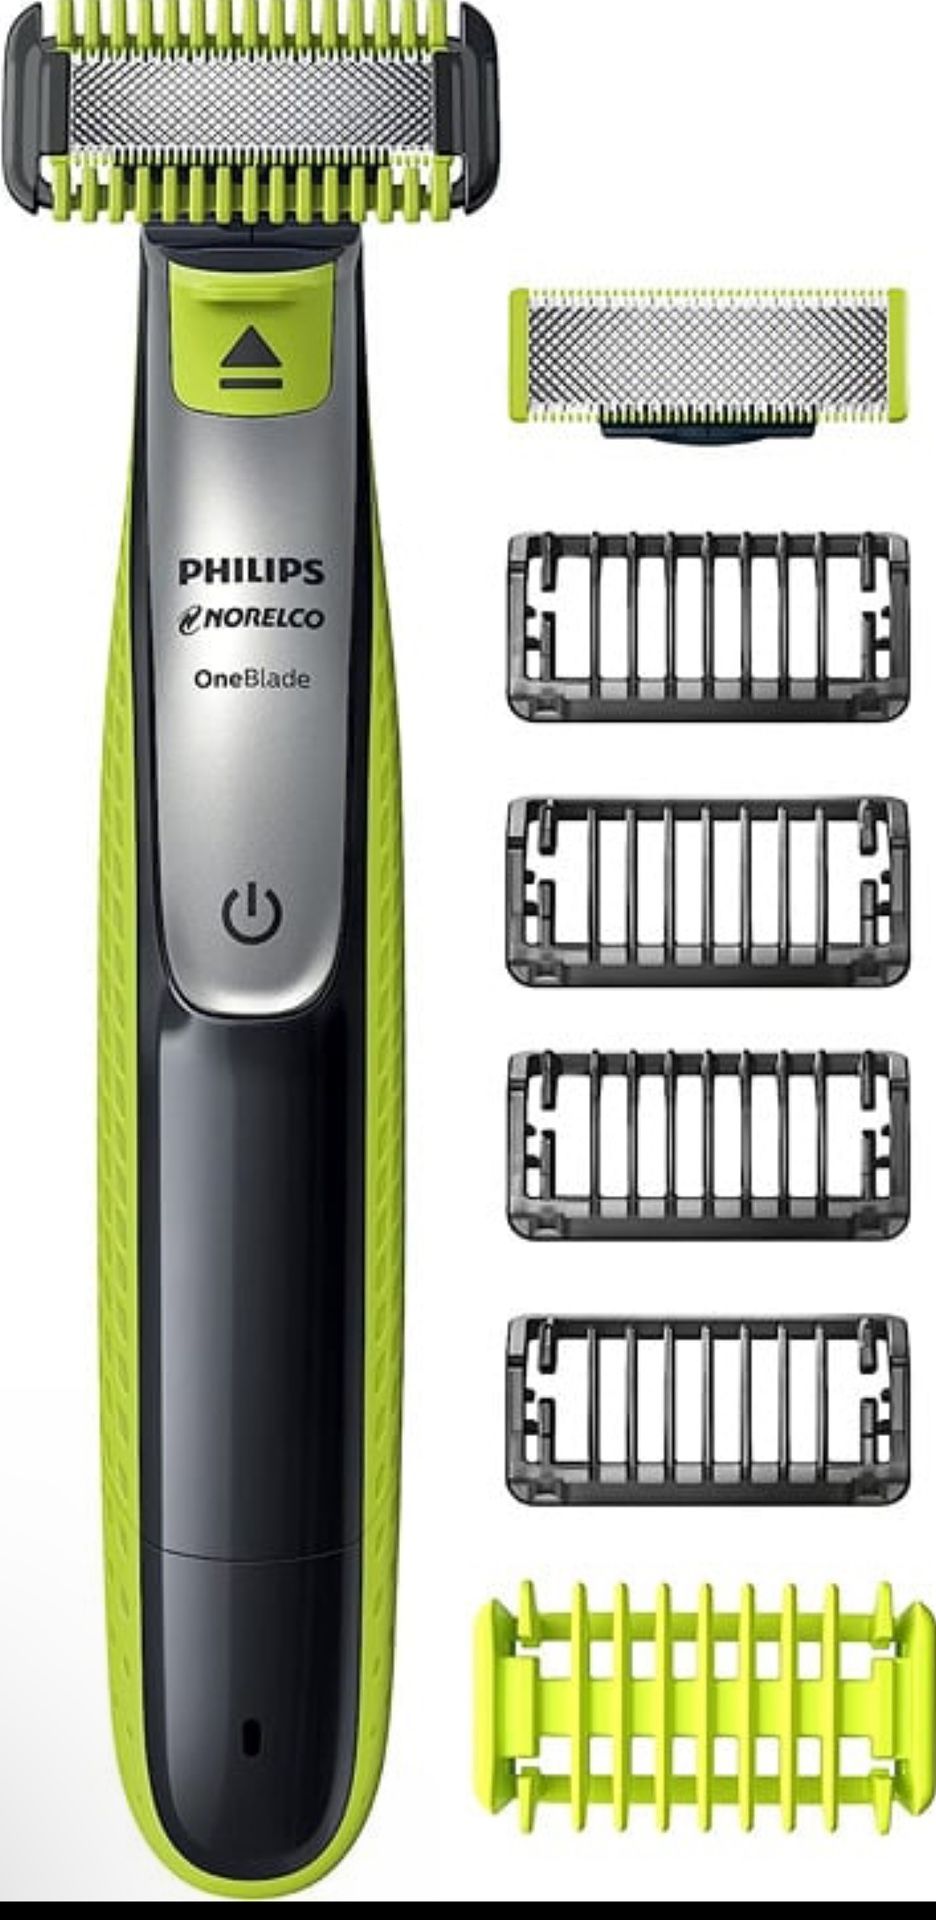 Philips Norelco OneBlade Face + Body Hybrid Electric Trimmer and Shaver, QP2630/